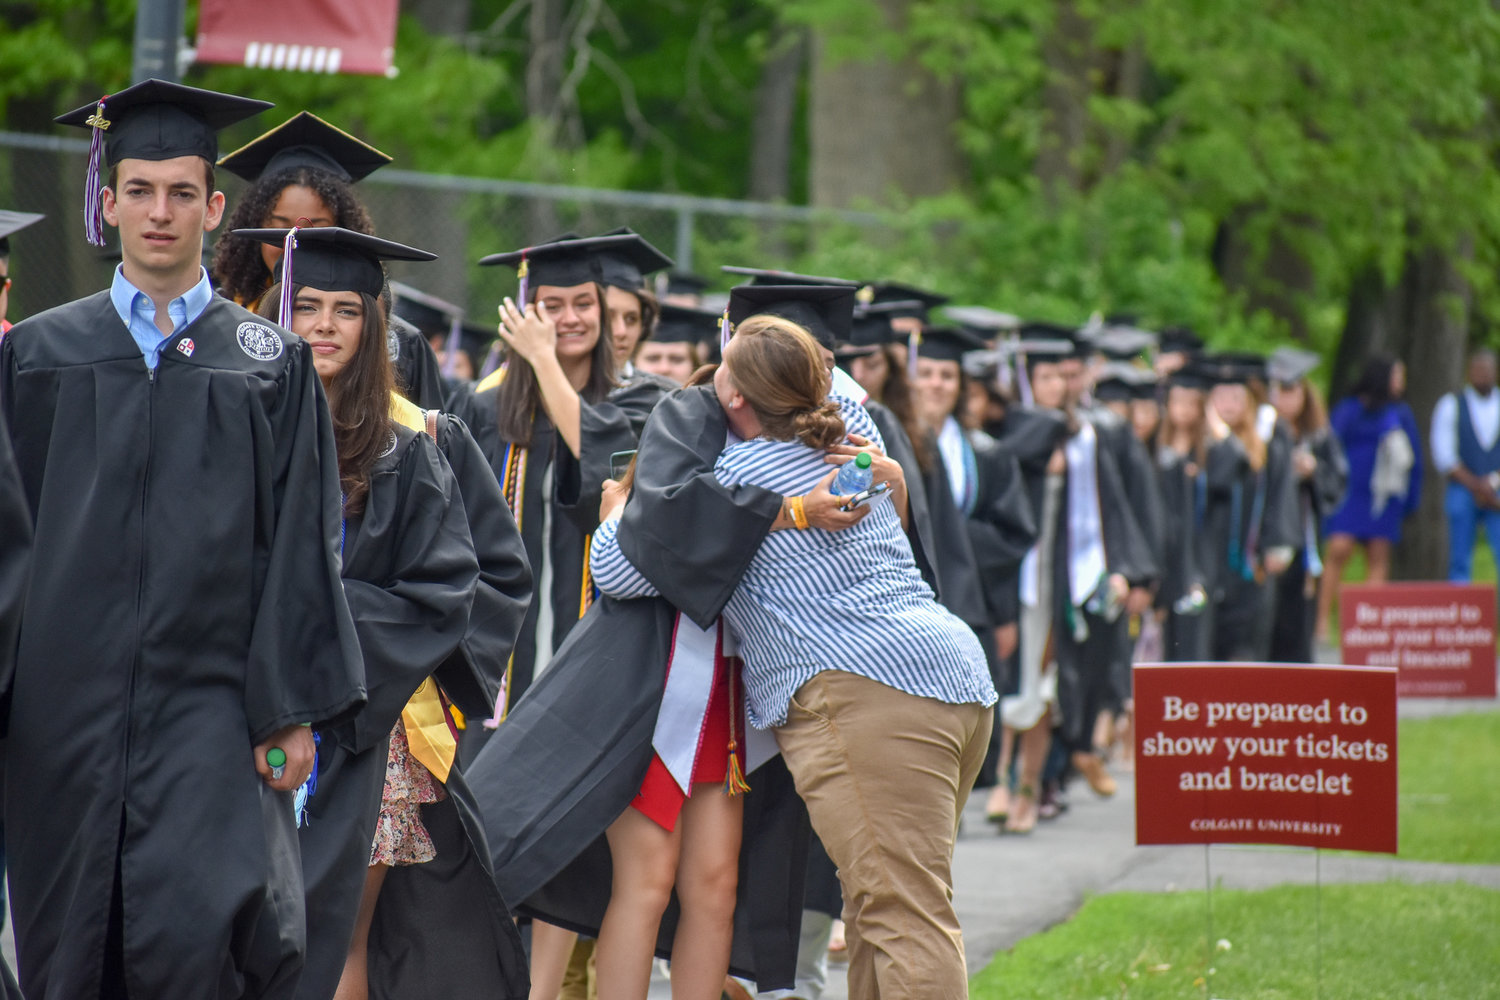 Nearly 700 students graduated during Colgate's 201st Commencement Ceremony on Sunday, May 22, 2022 at the Sanford Field House.